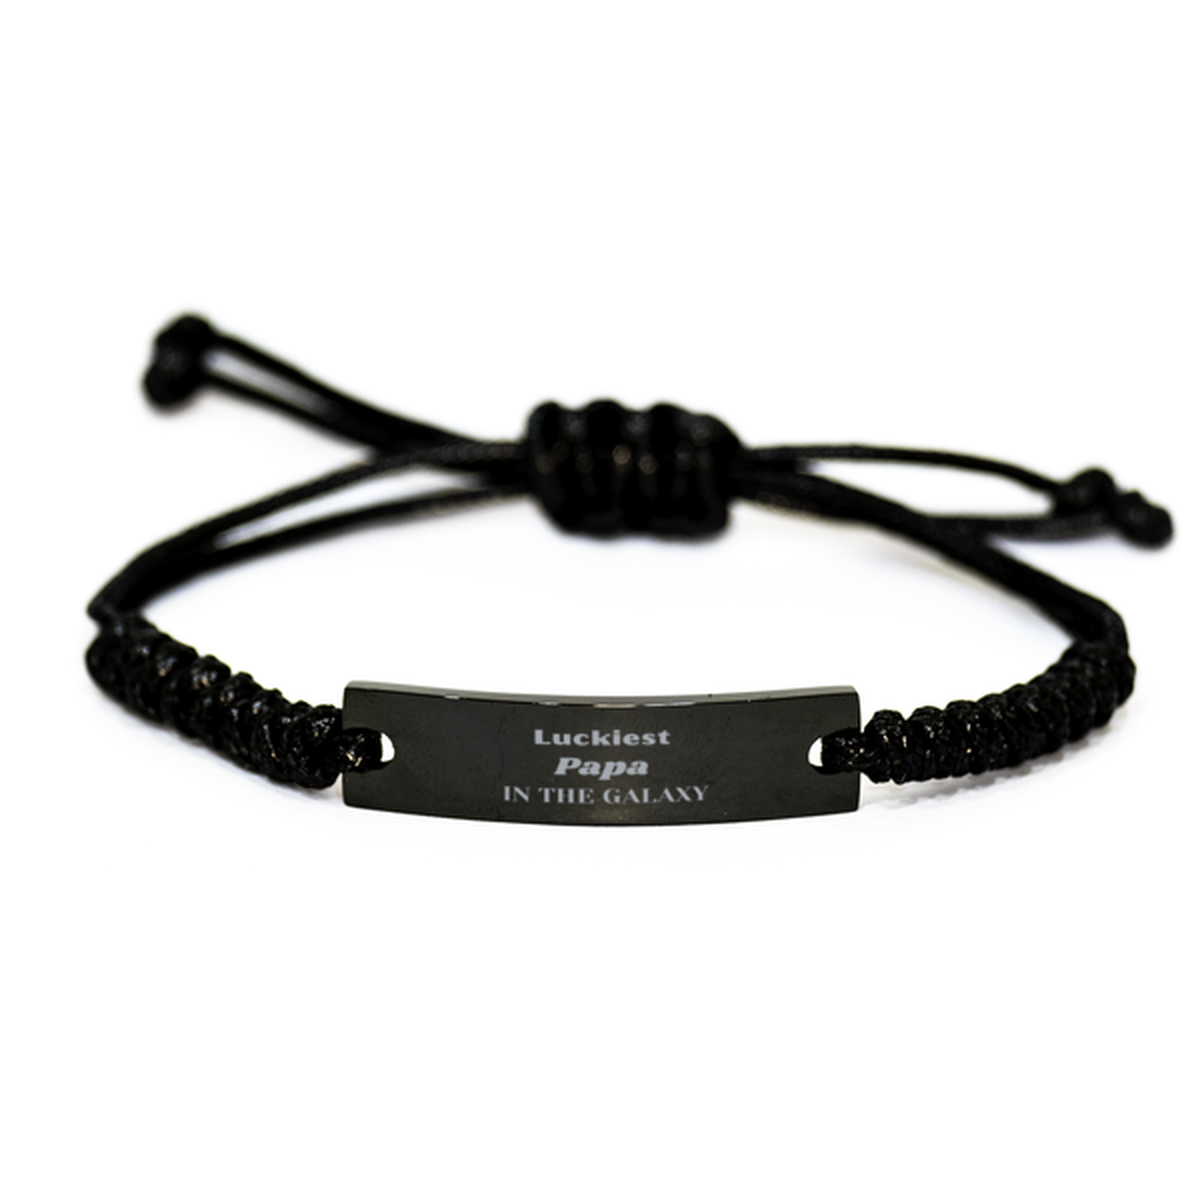 Luckiest Papa in the Galaxy, To My Papa Engraved Gifts, Christmas Papa Black Rope Bracelet Gifts, X-mas Birthday Unique Gifts For Papa Men Women